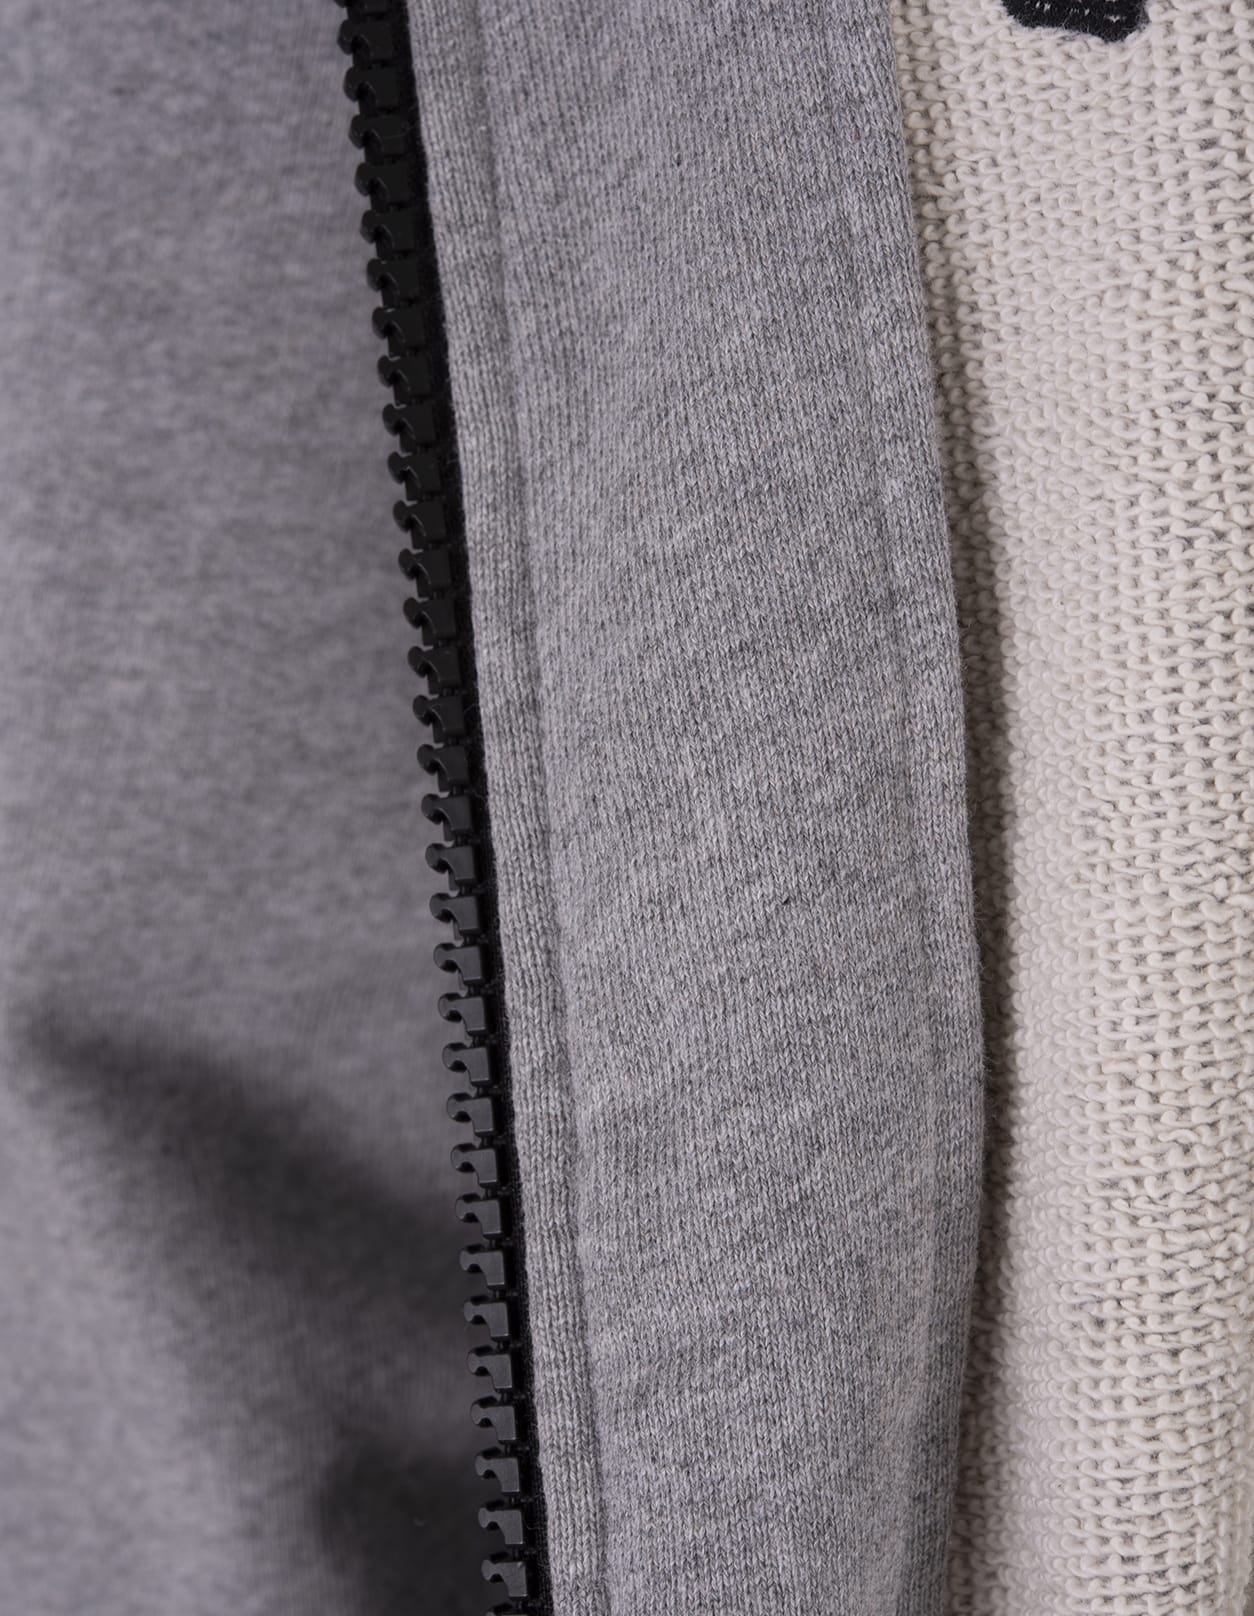 Shop Givenchy Grey  College Hoodie